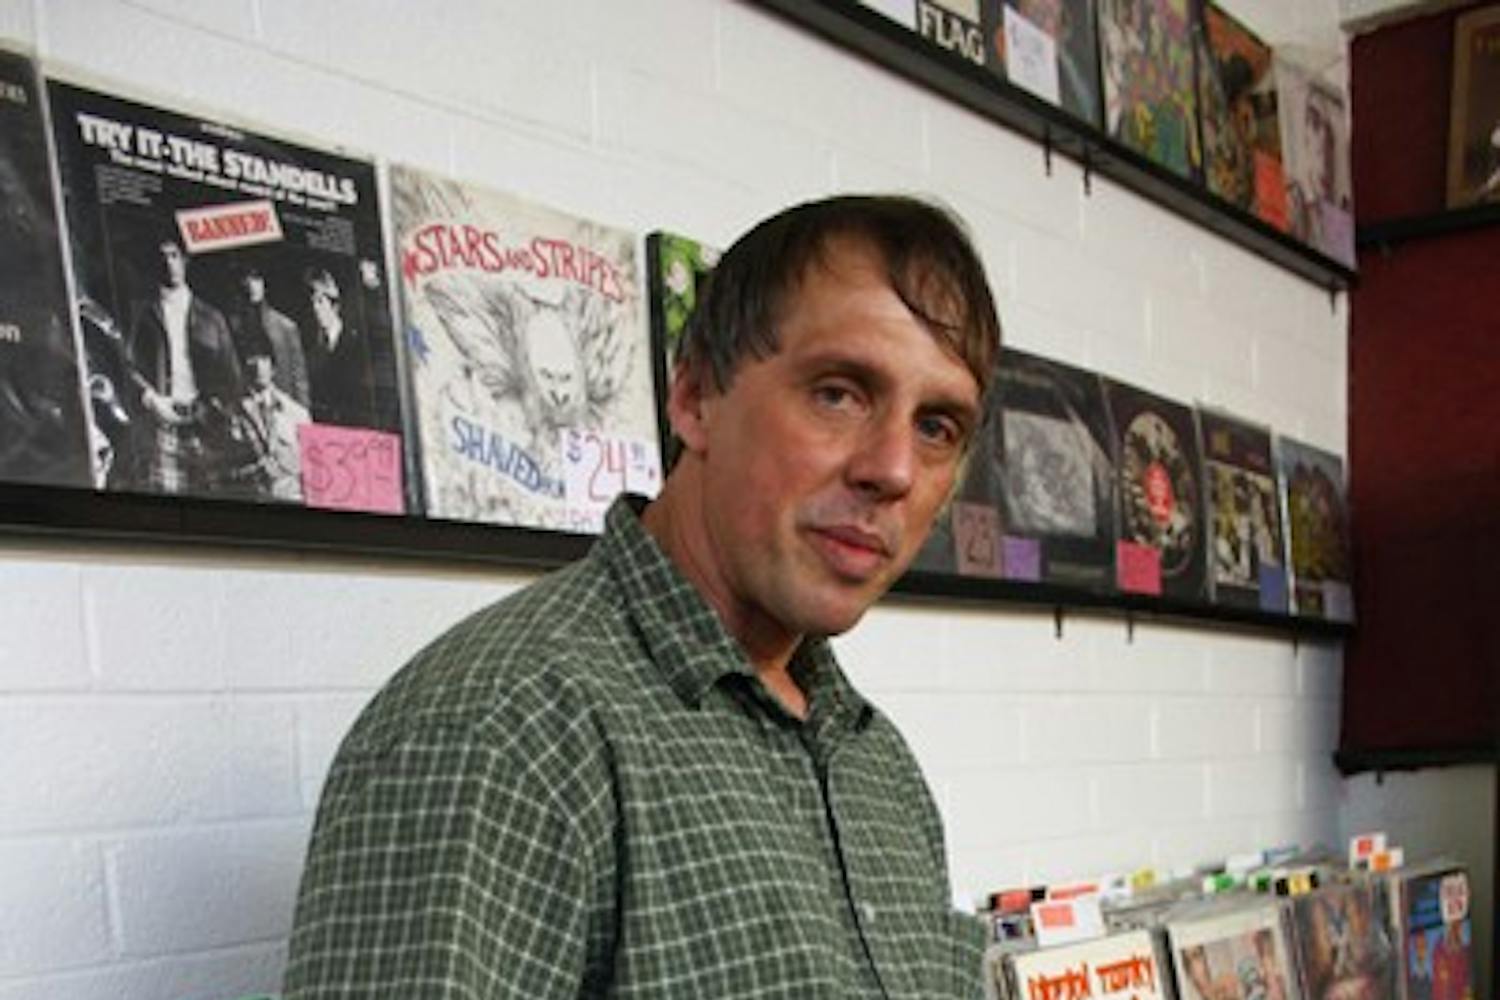 Although Eastside Records closed in 2010, owner Mike Pawlicki reopened the store under the name Ghosts of Eastside Records in January 2012. (Photo by Shawn Raymundo)